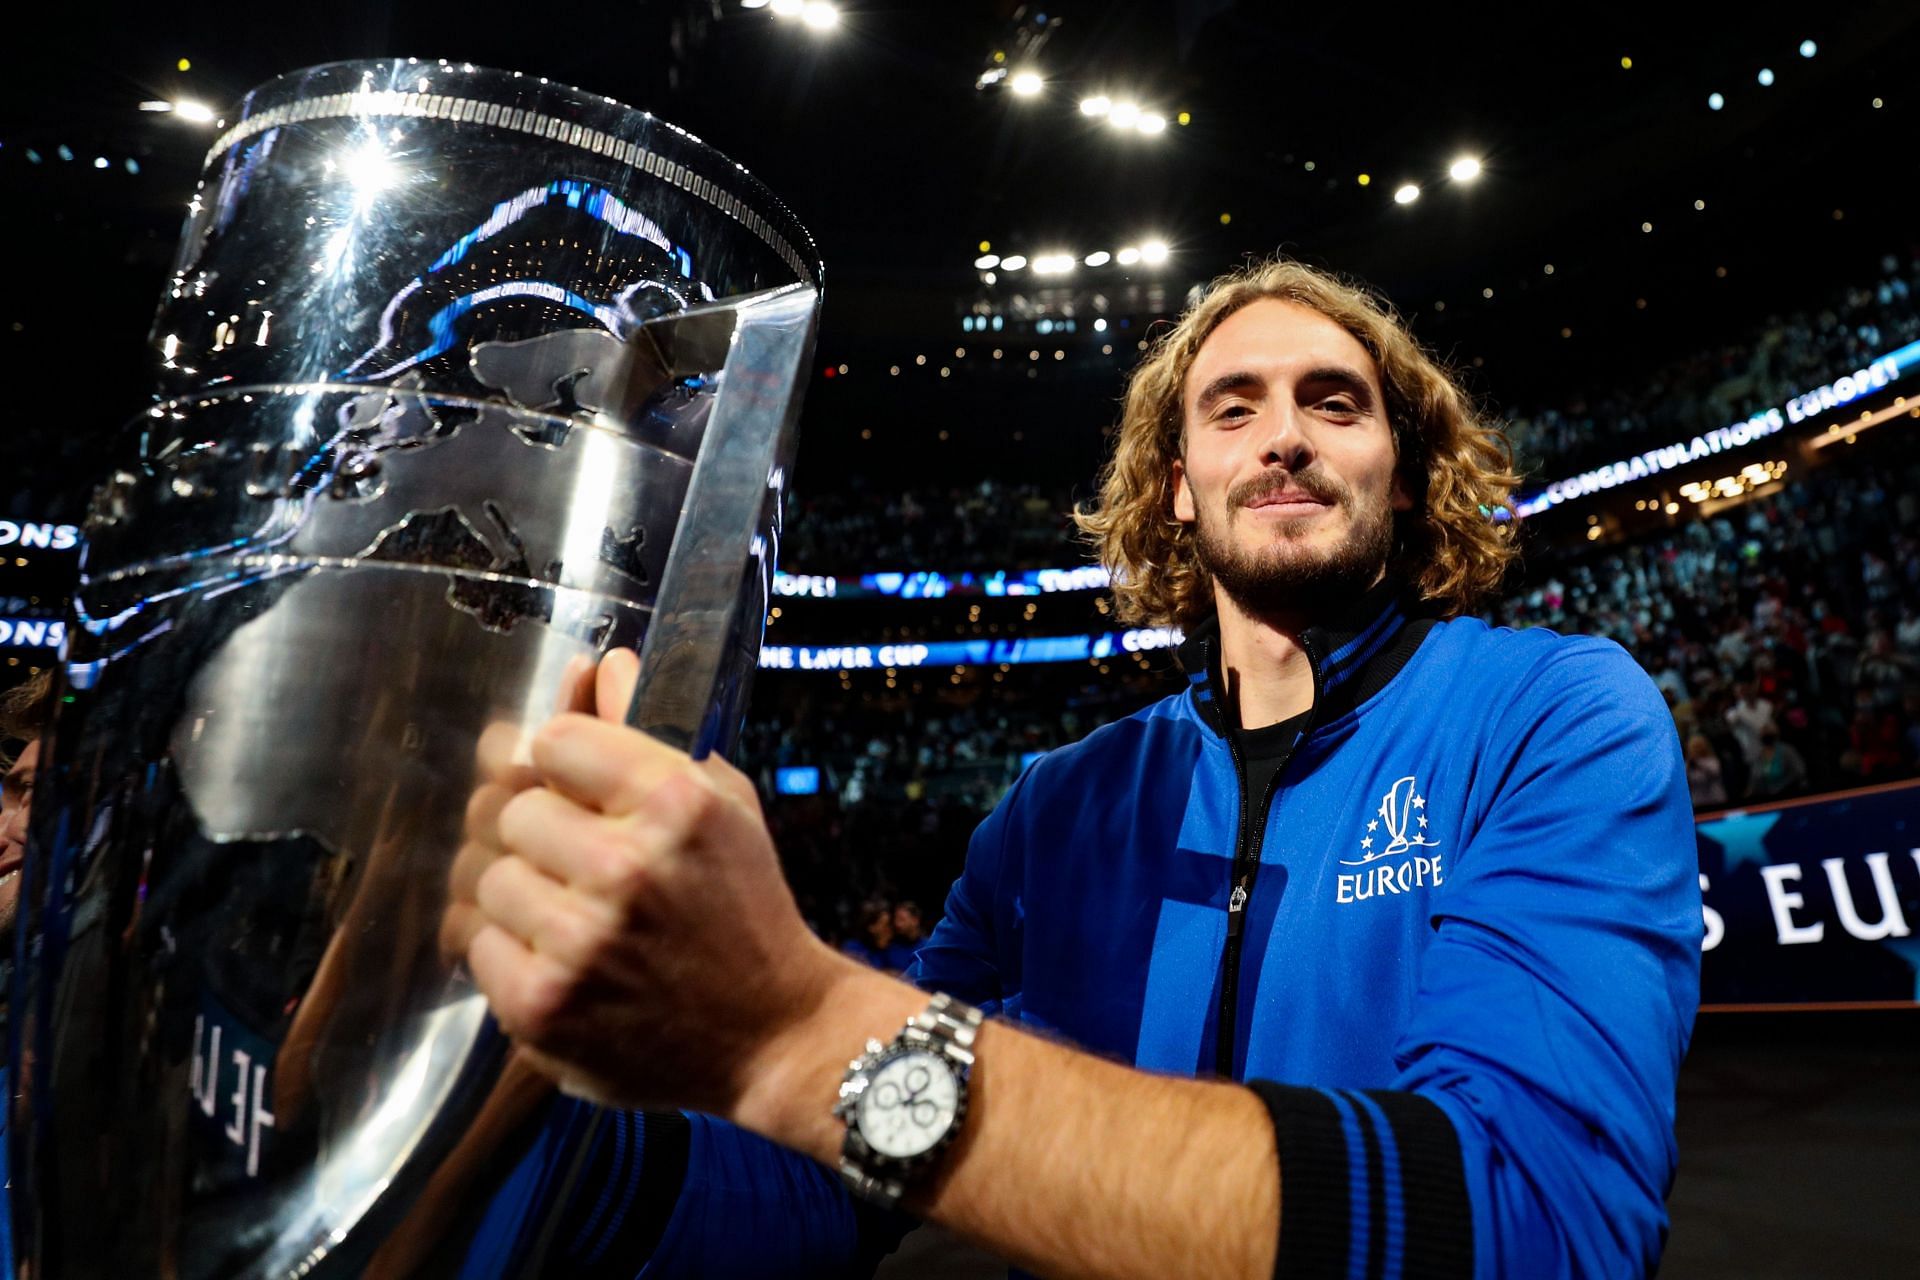 Stefanos Tsitsipas poses for the camera at the 2021 Laver Cup